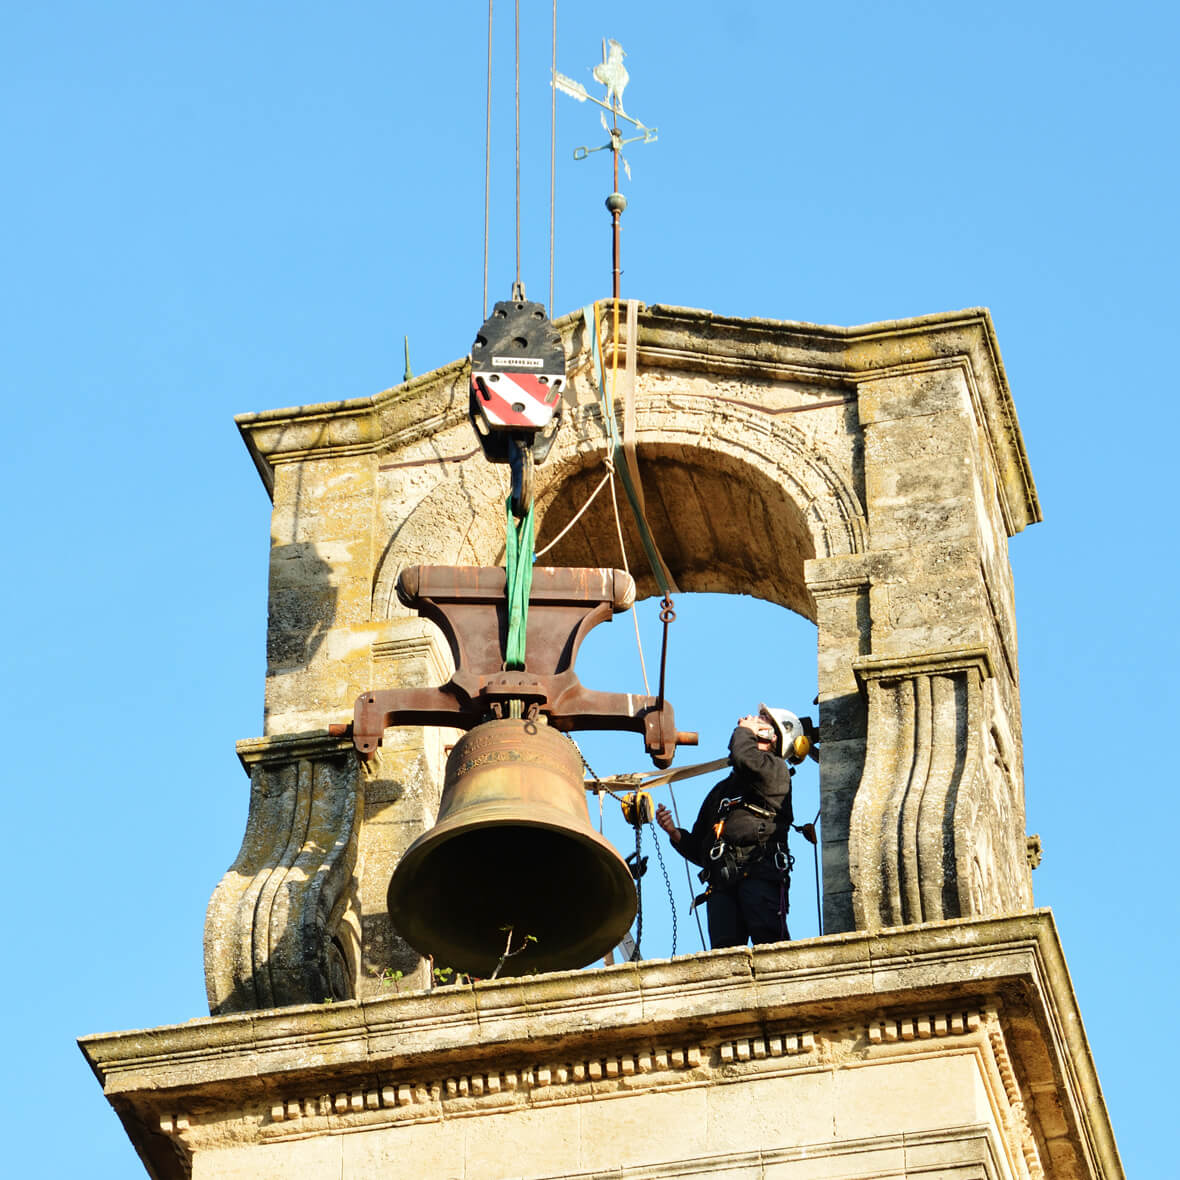 Raising of the Temple Bell, Oct. 10, 2019